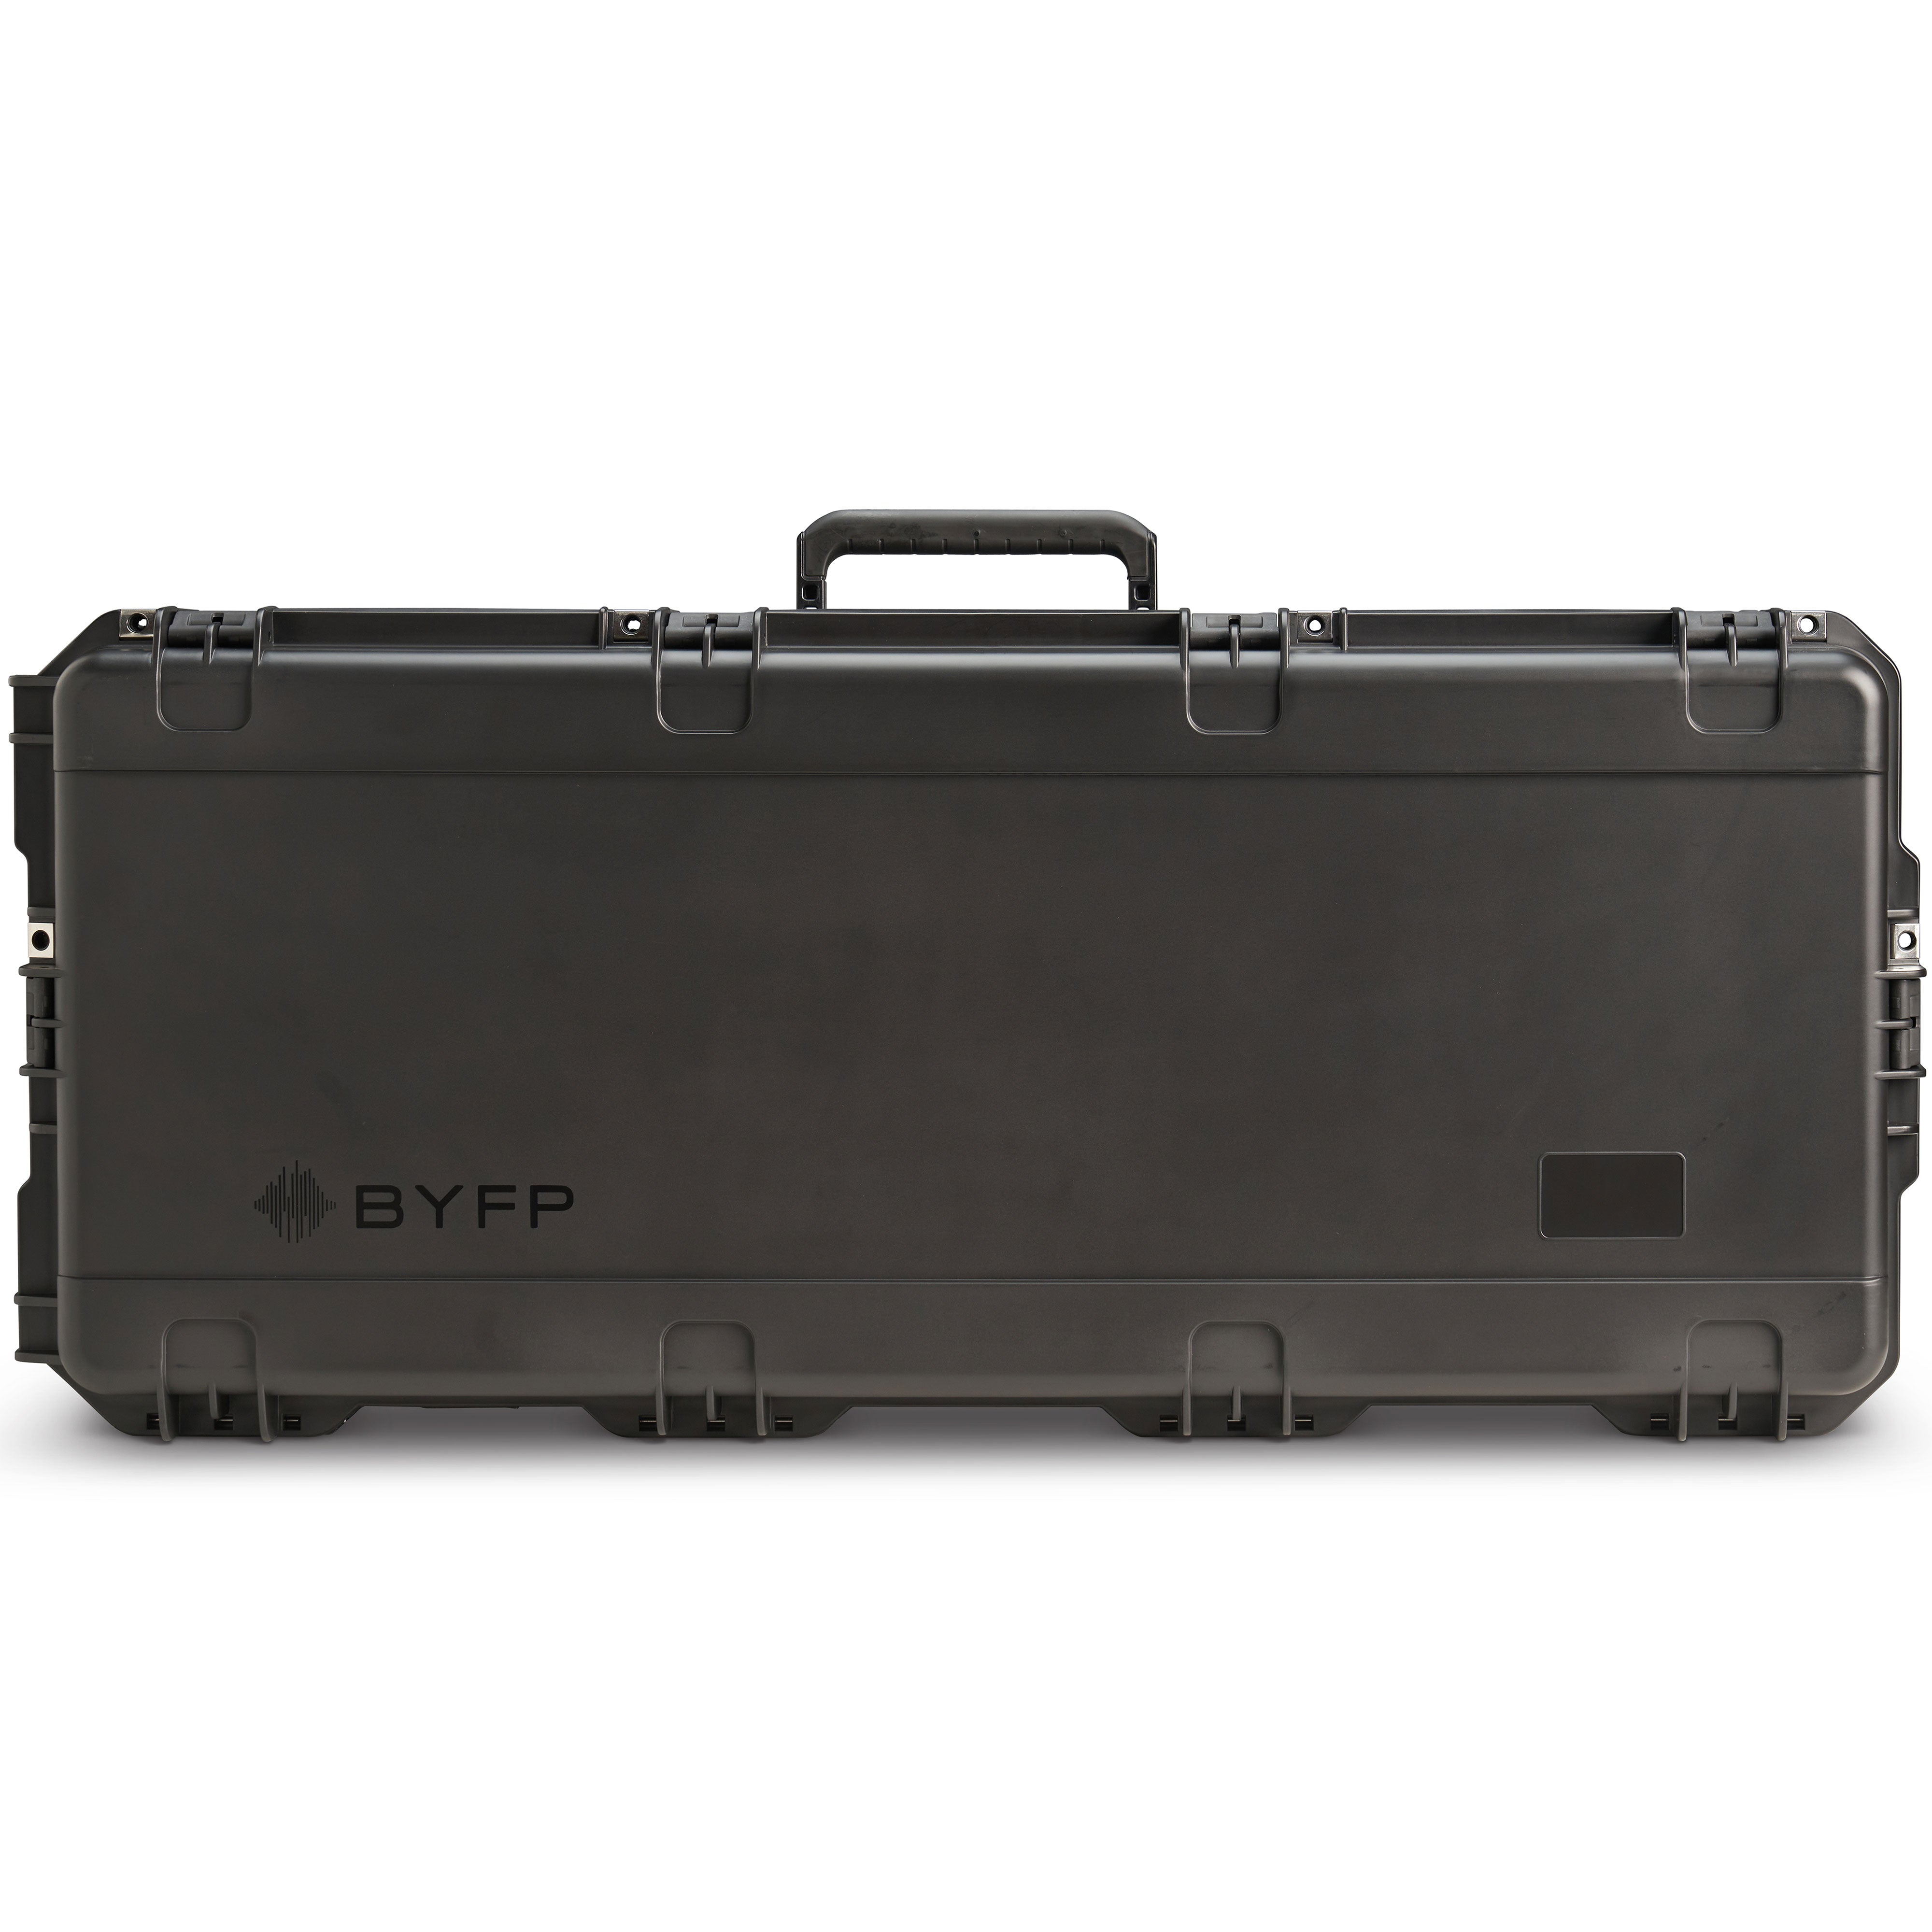 BYFP ipCase for ChamSys QuickQ 30 Lighting Controller